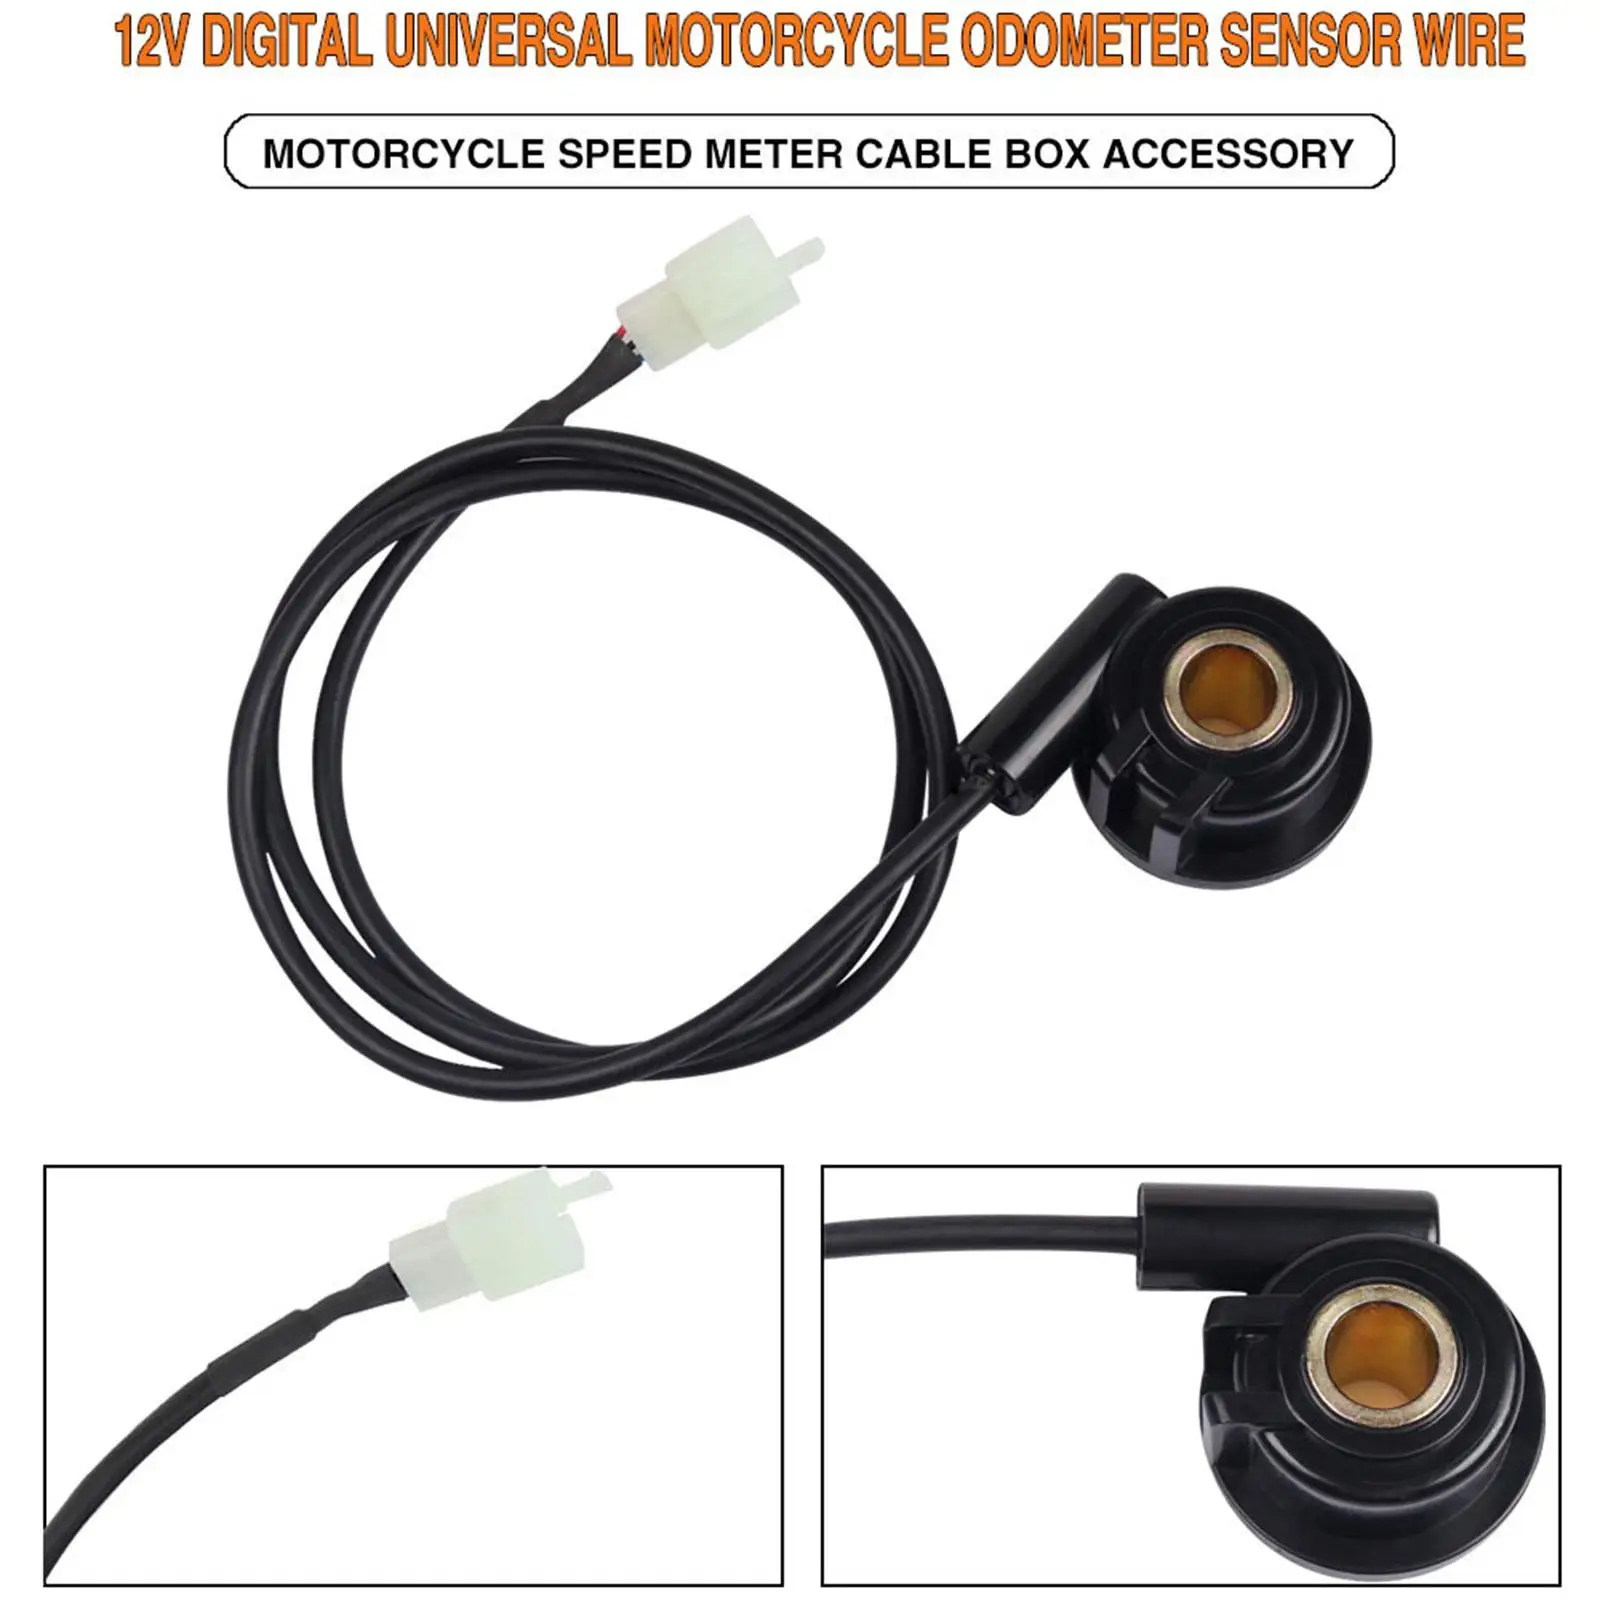 Motorcycle Speed Meter Sensor Wire Easy to Install Direct Replaces Universal